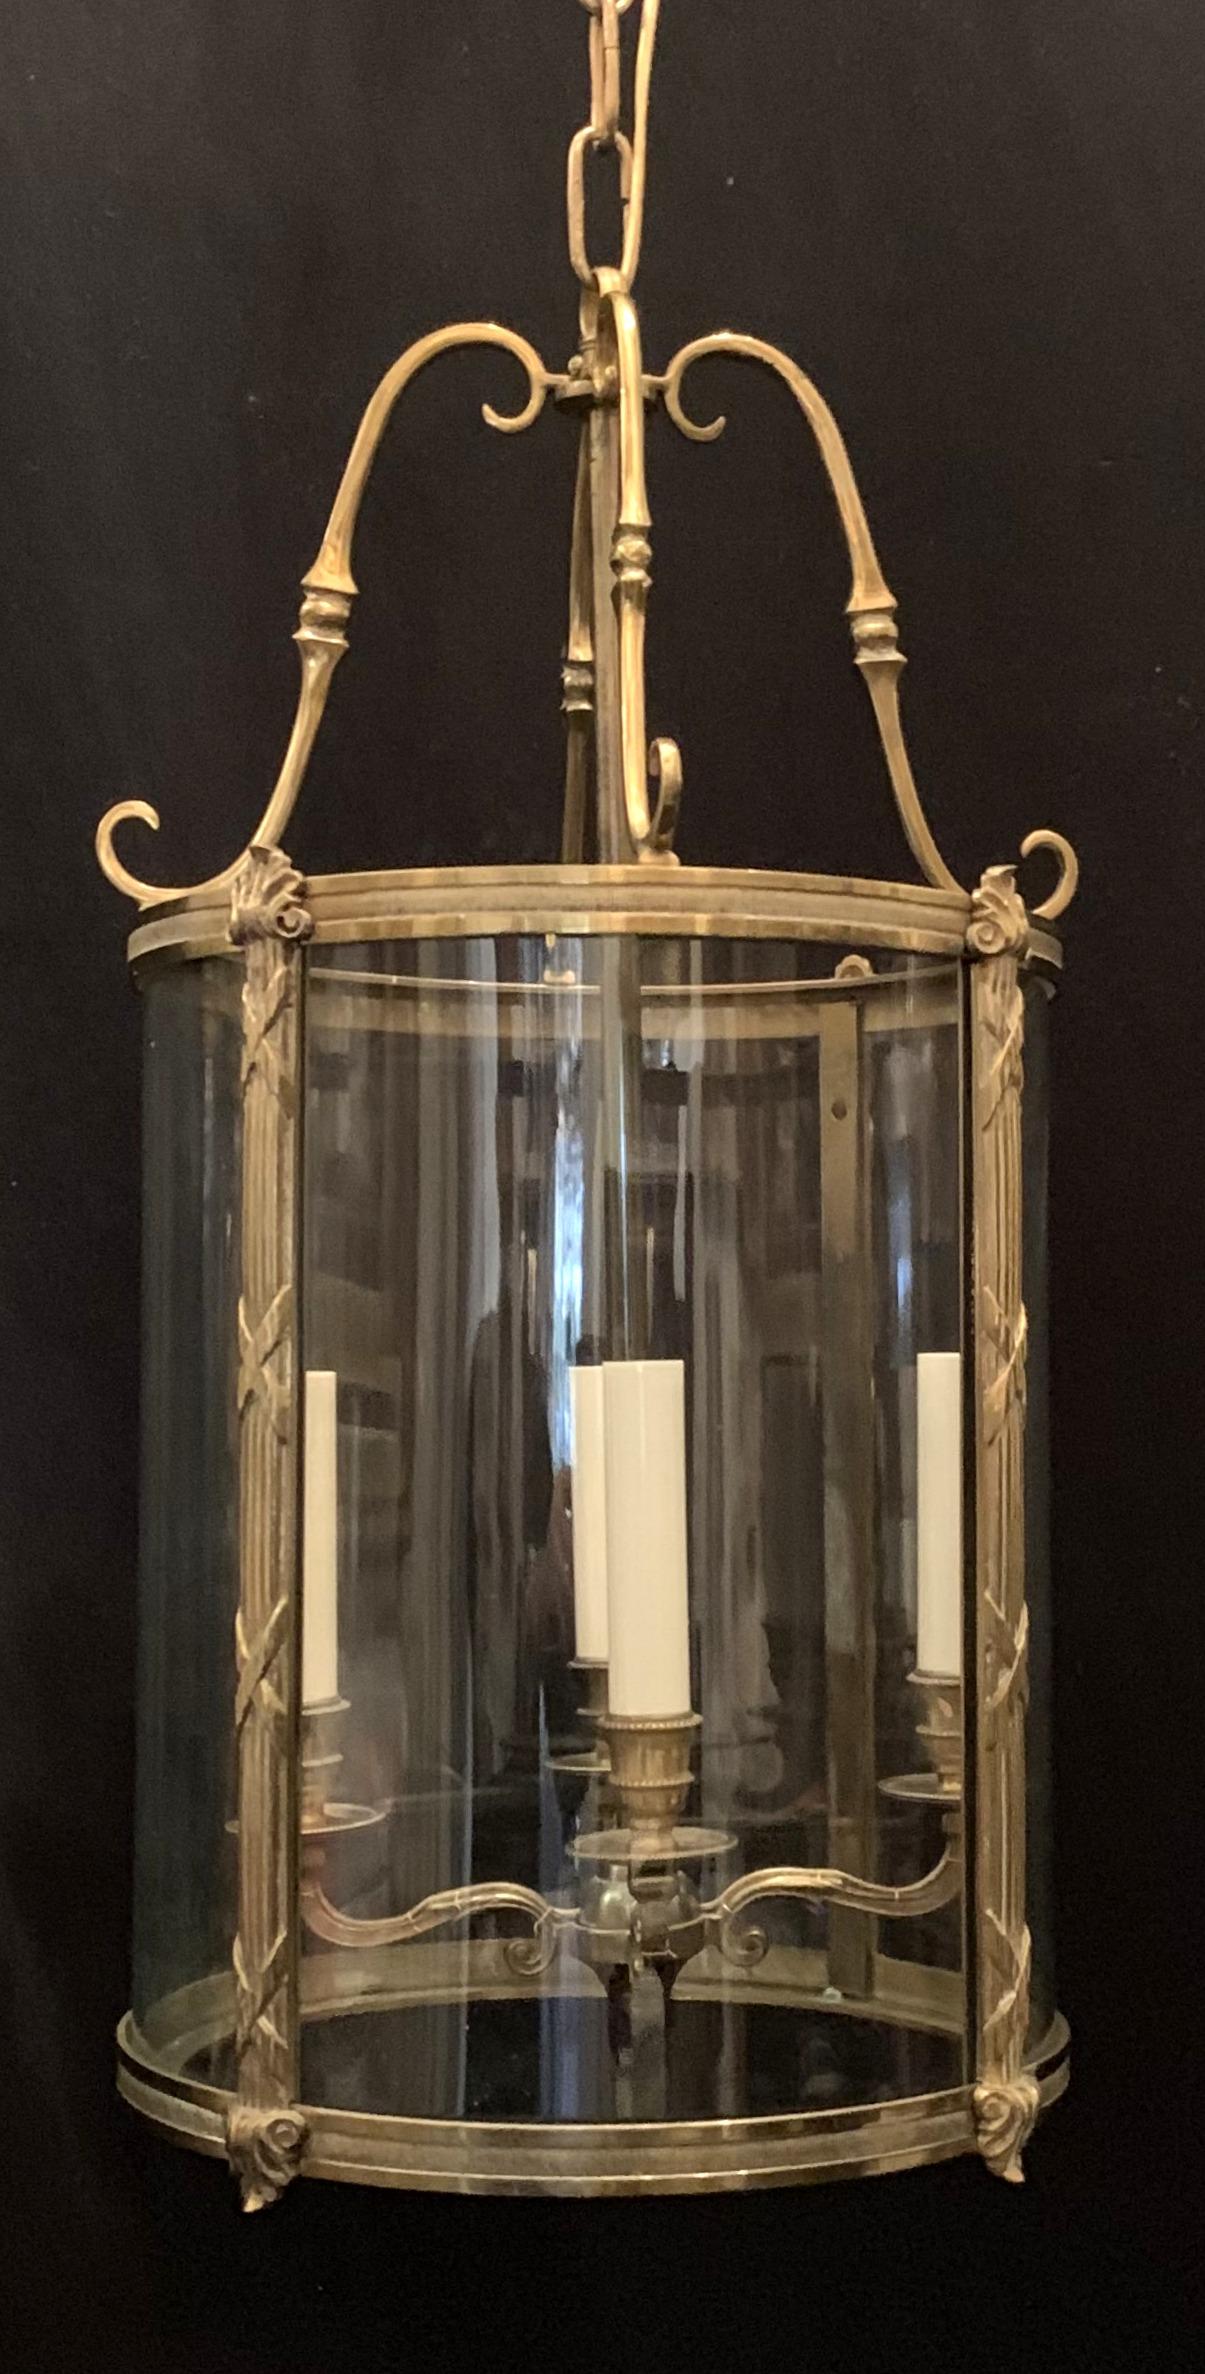 Mid-20th Century Wonderful Gilt Bronze Readed X-Pattern Curved Glass Lantern Neoclassical Fixture For Sale